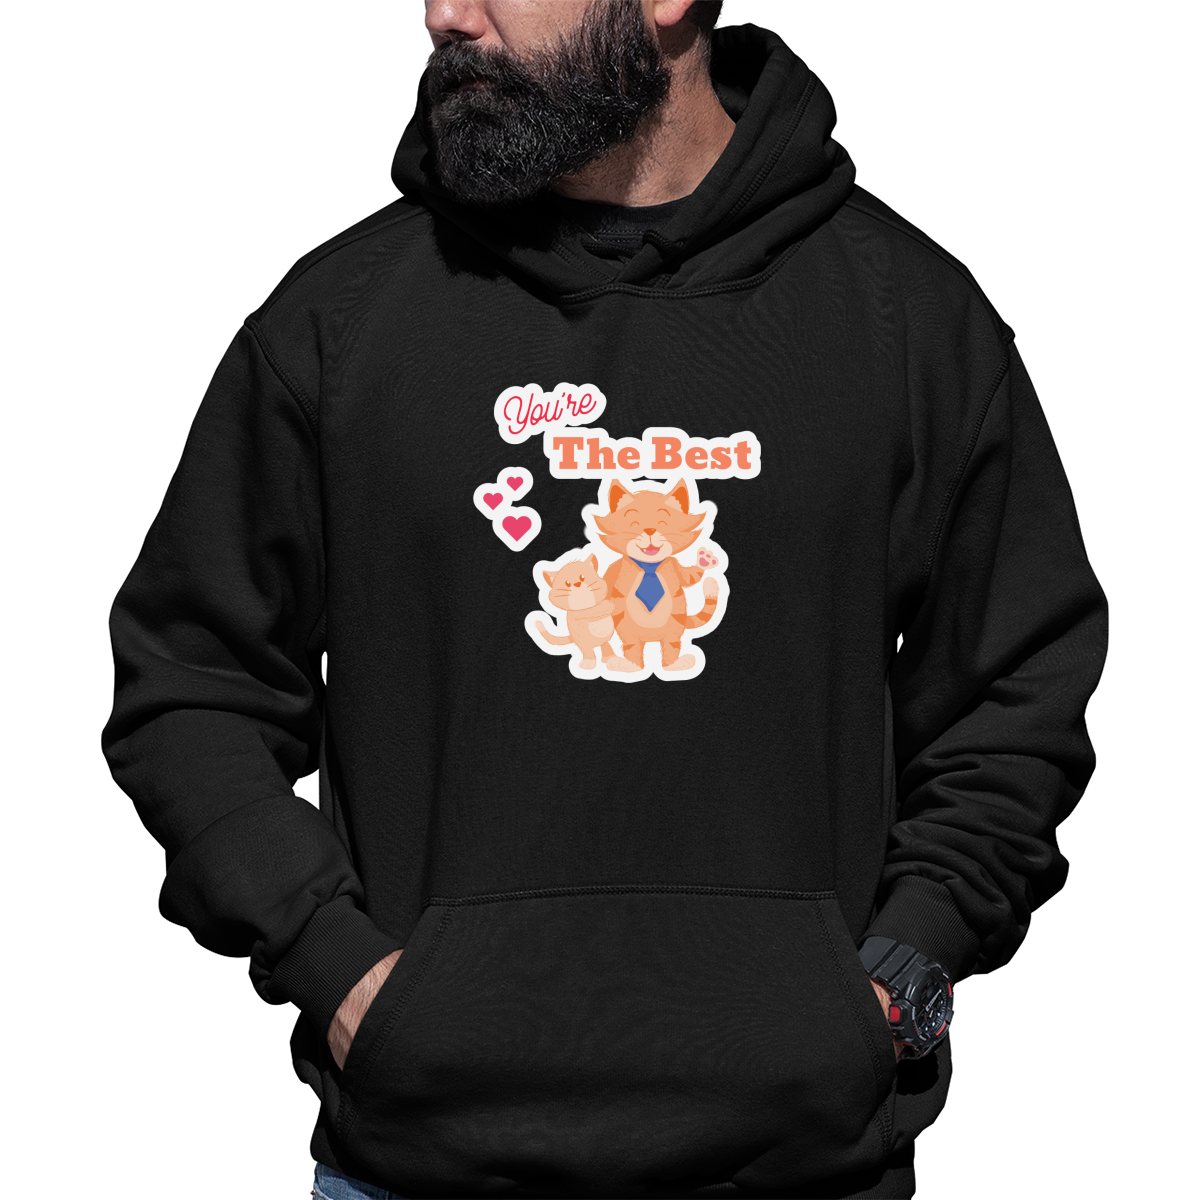 You are the best Unisex Hoodie | Black